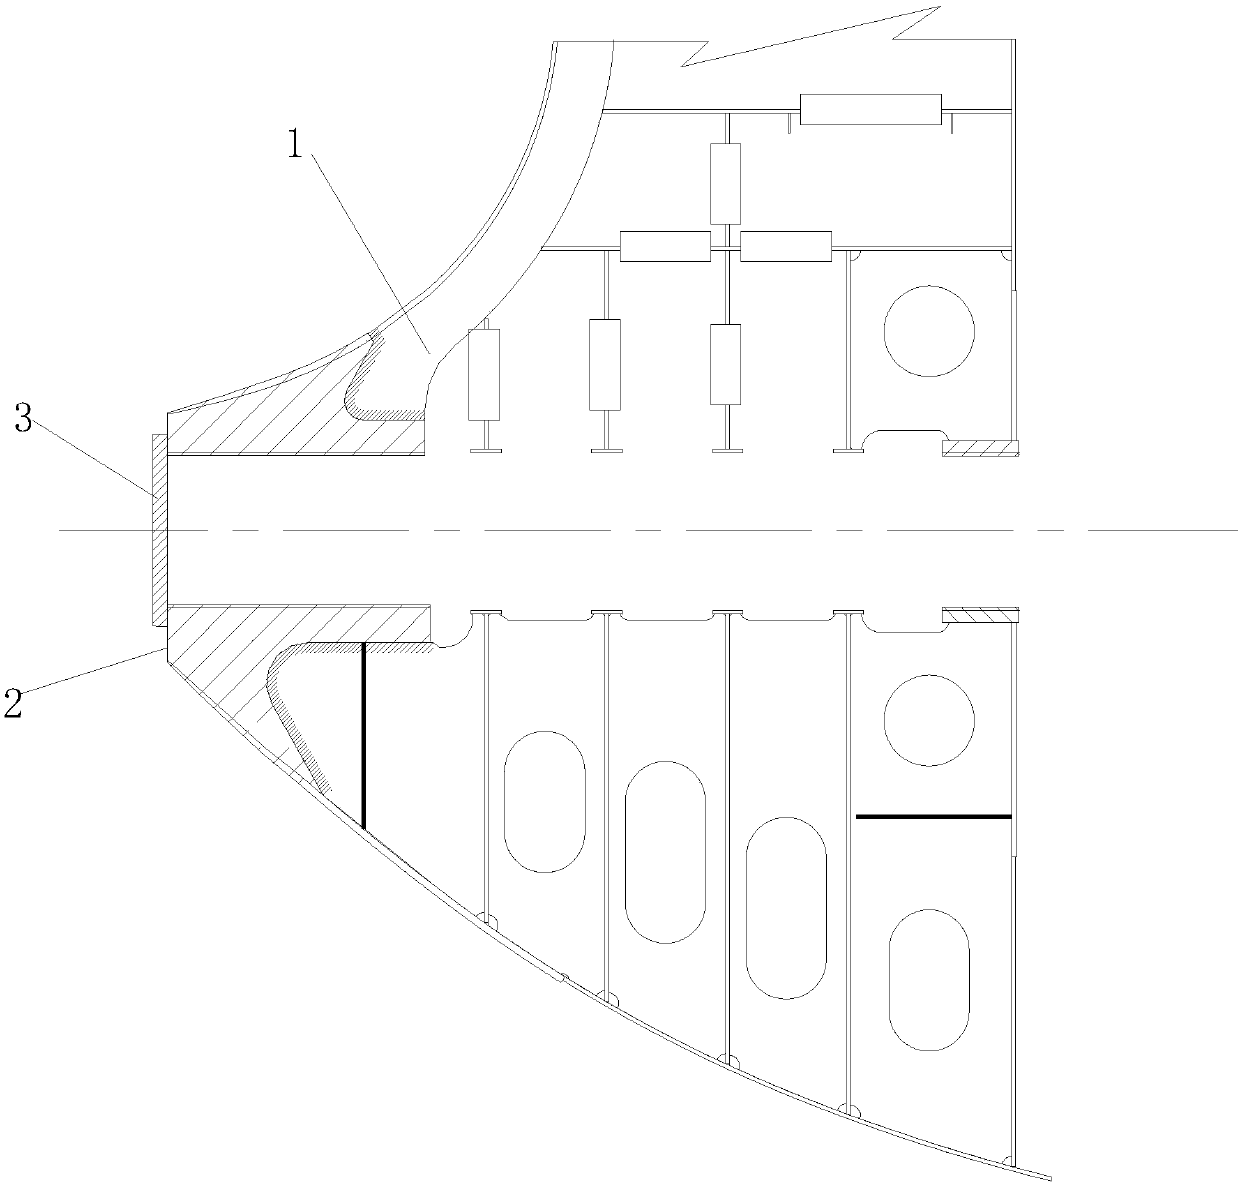 Method of sealing half-hull lift stern shaft hole or sea chest